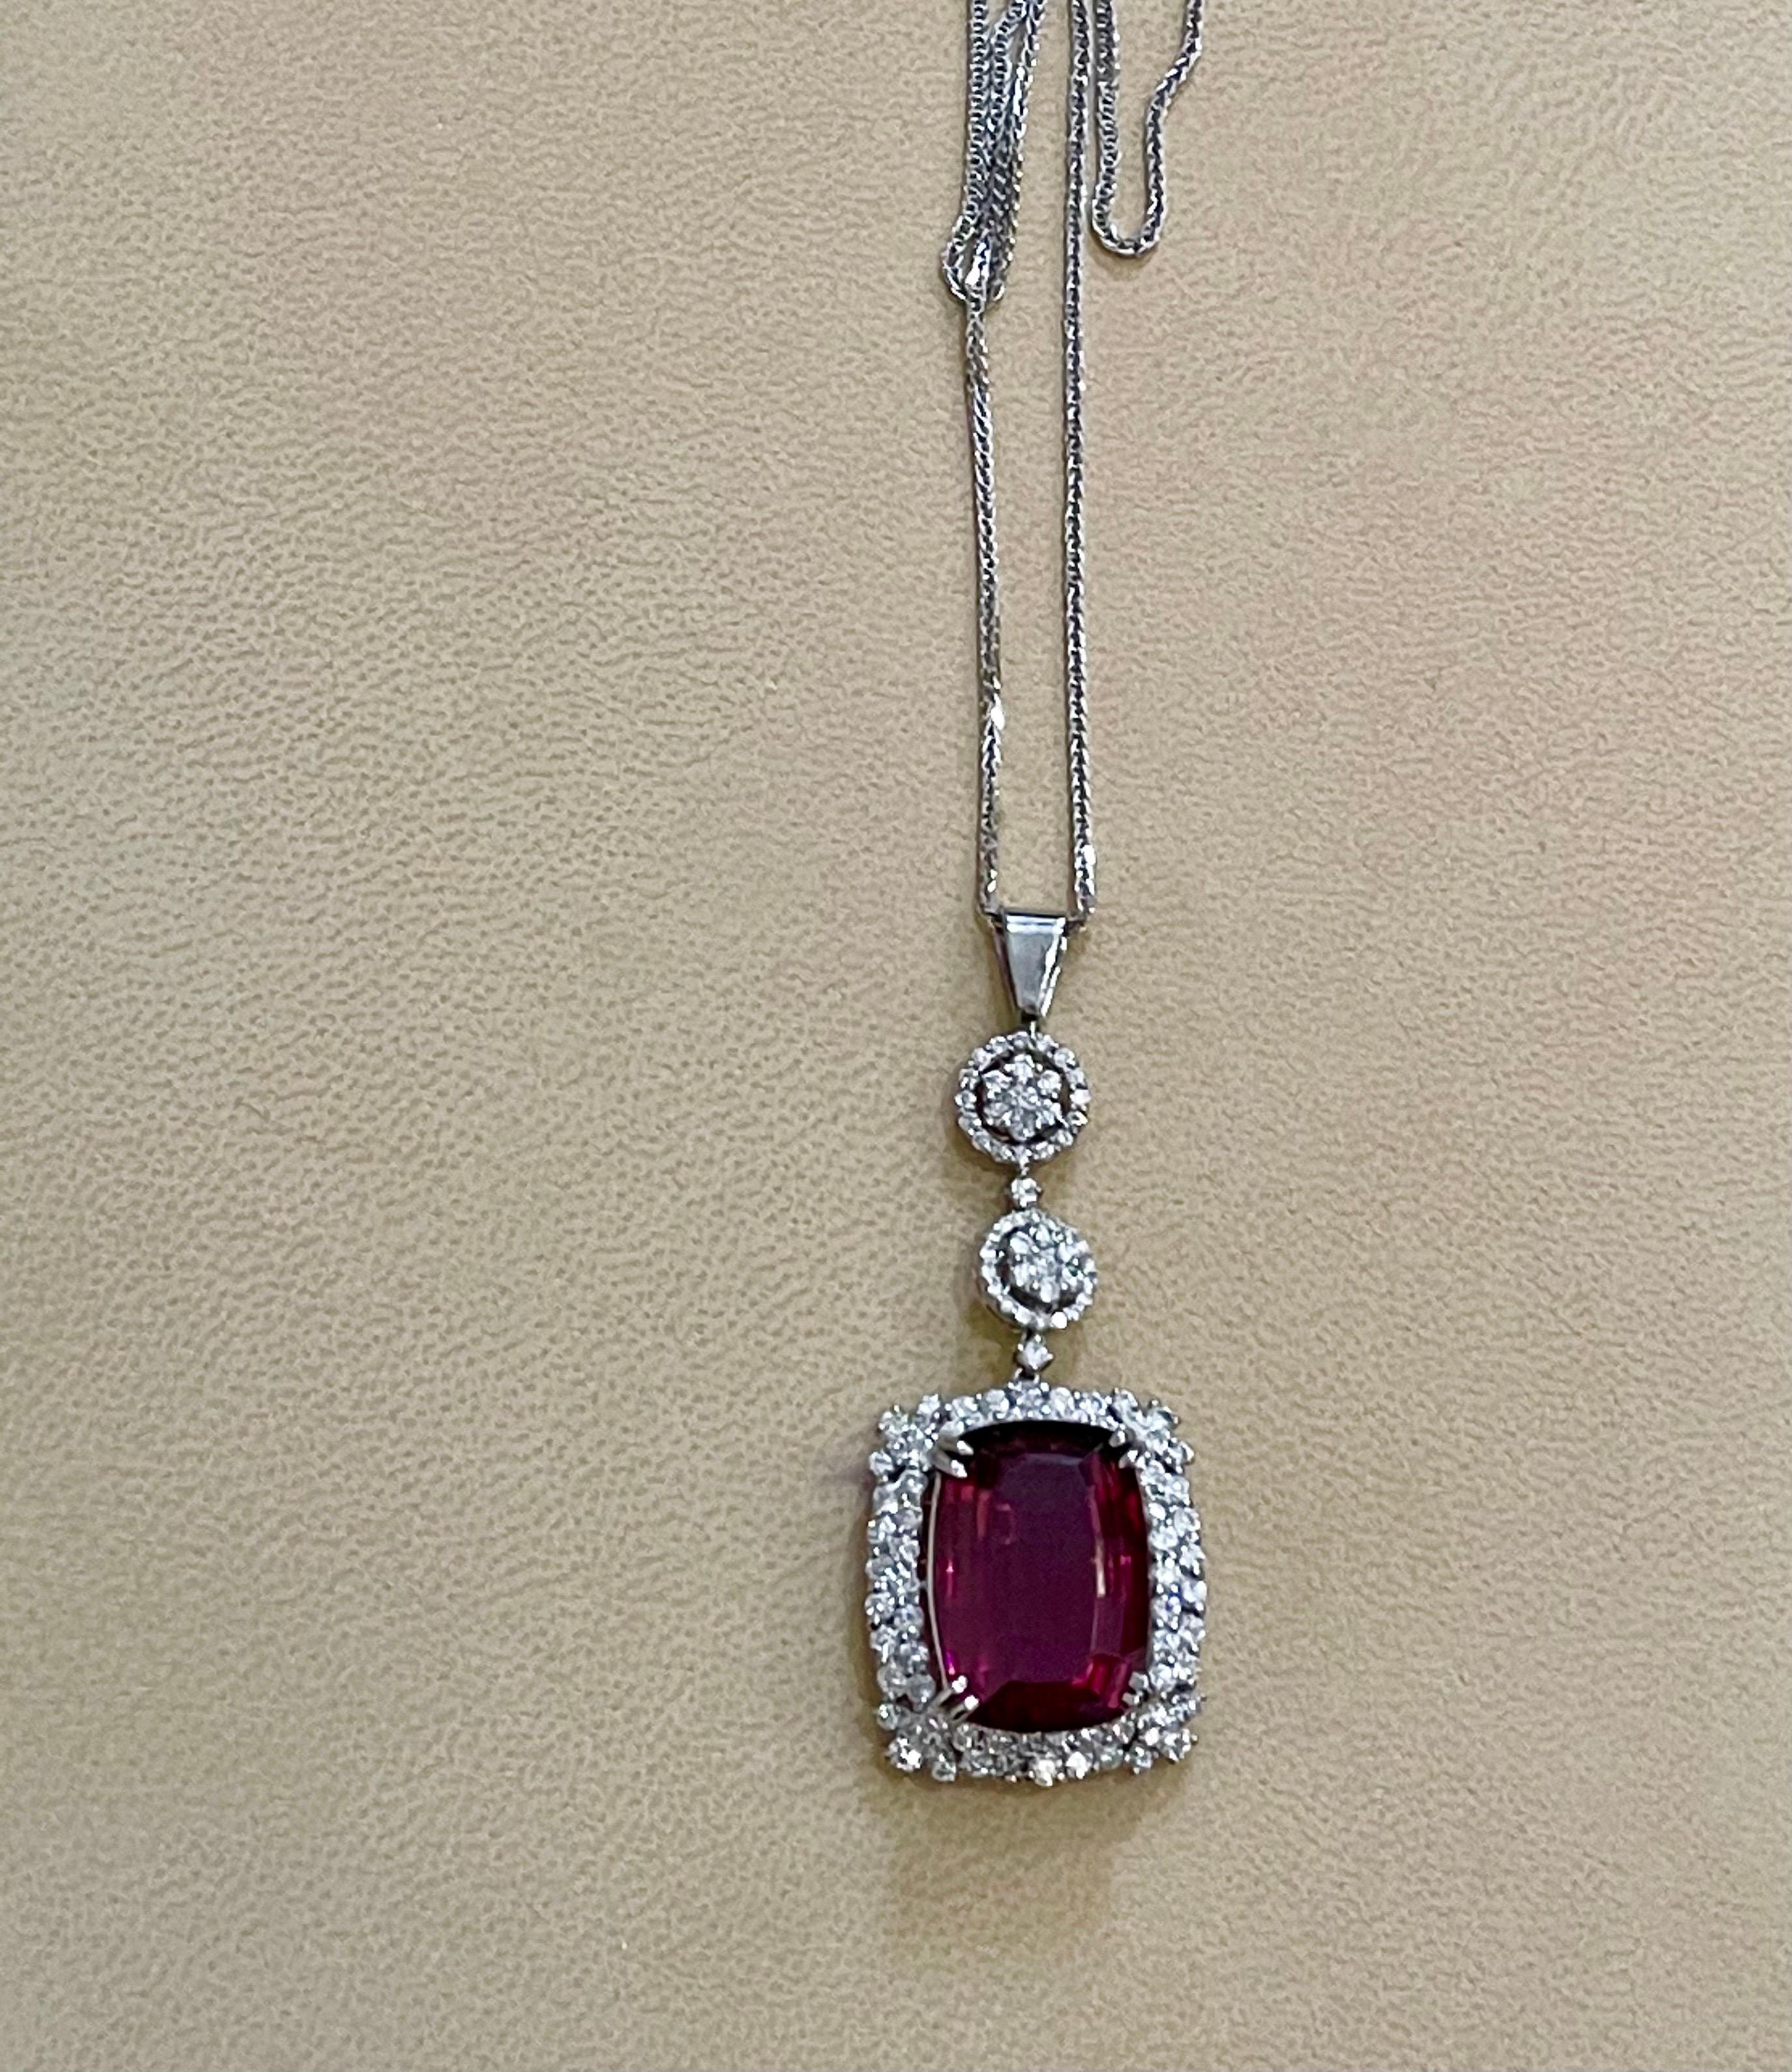 17 Carat Rubelite and 4 Carat Diamond Pendant / Necklace 14 Karat Gold, Estate In Excellent Condition For Sale In New York, NY